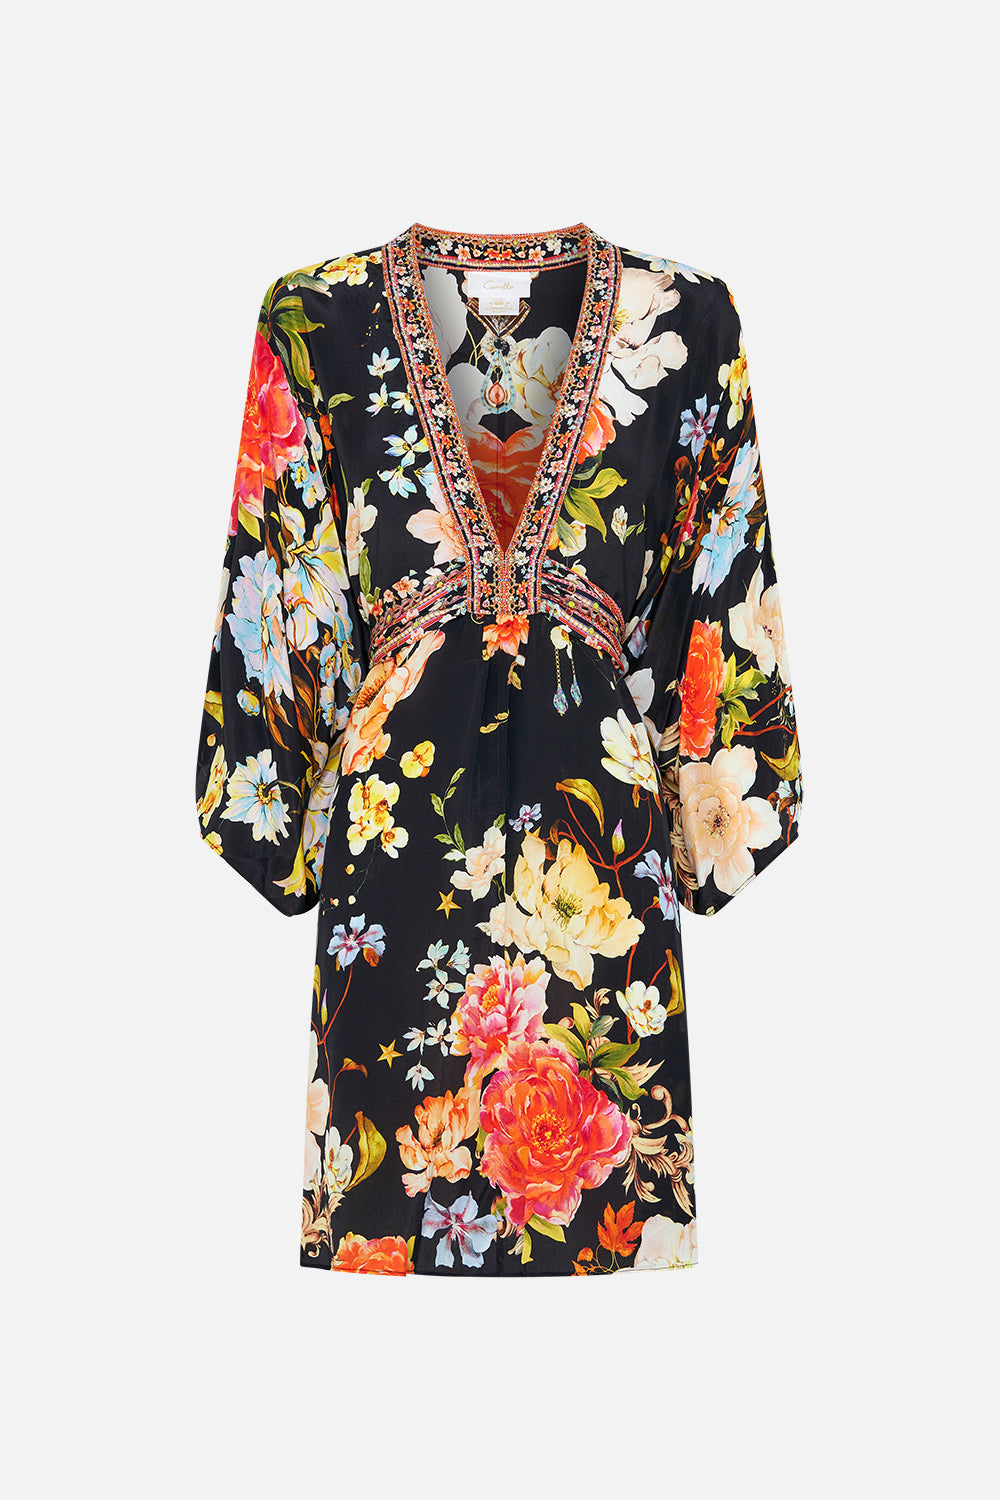 Product view of CAMILLA floral silk kaftan in Secret History print